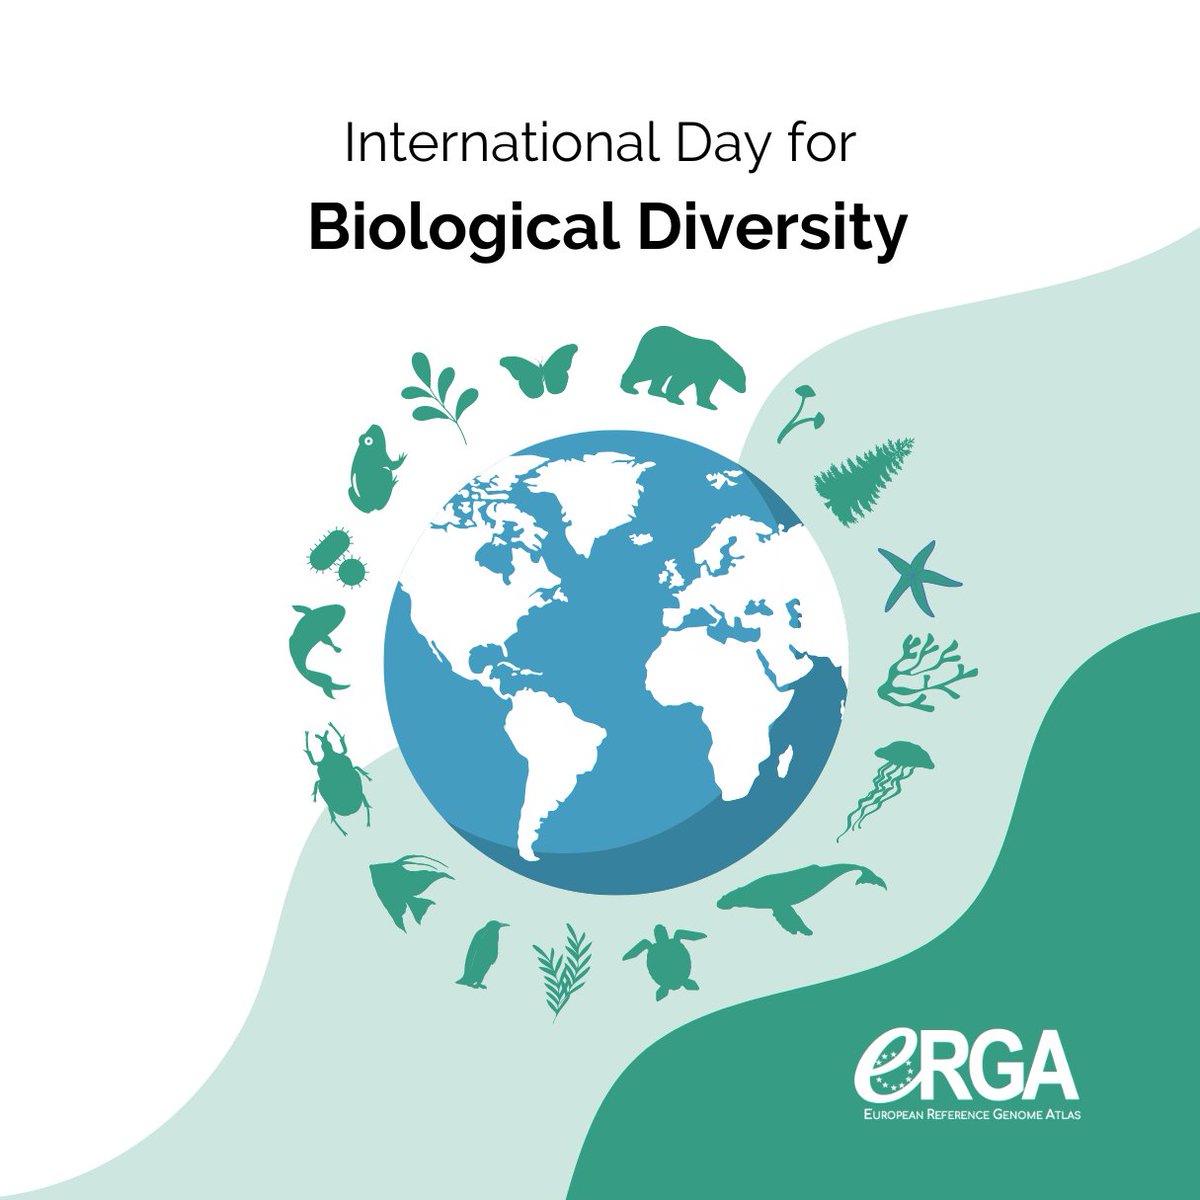 Today we celebrate the international day for biological diversity!🌍 An opportunity to reflect on the importance of understanding and conserving #biodiversity at all levels: from #genes to whole #ecosystems. @BioGenEurope @EBPgenome #BuildBackBiodiversity #BiodiversityDay